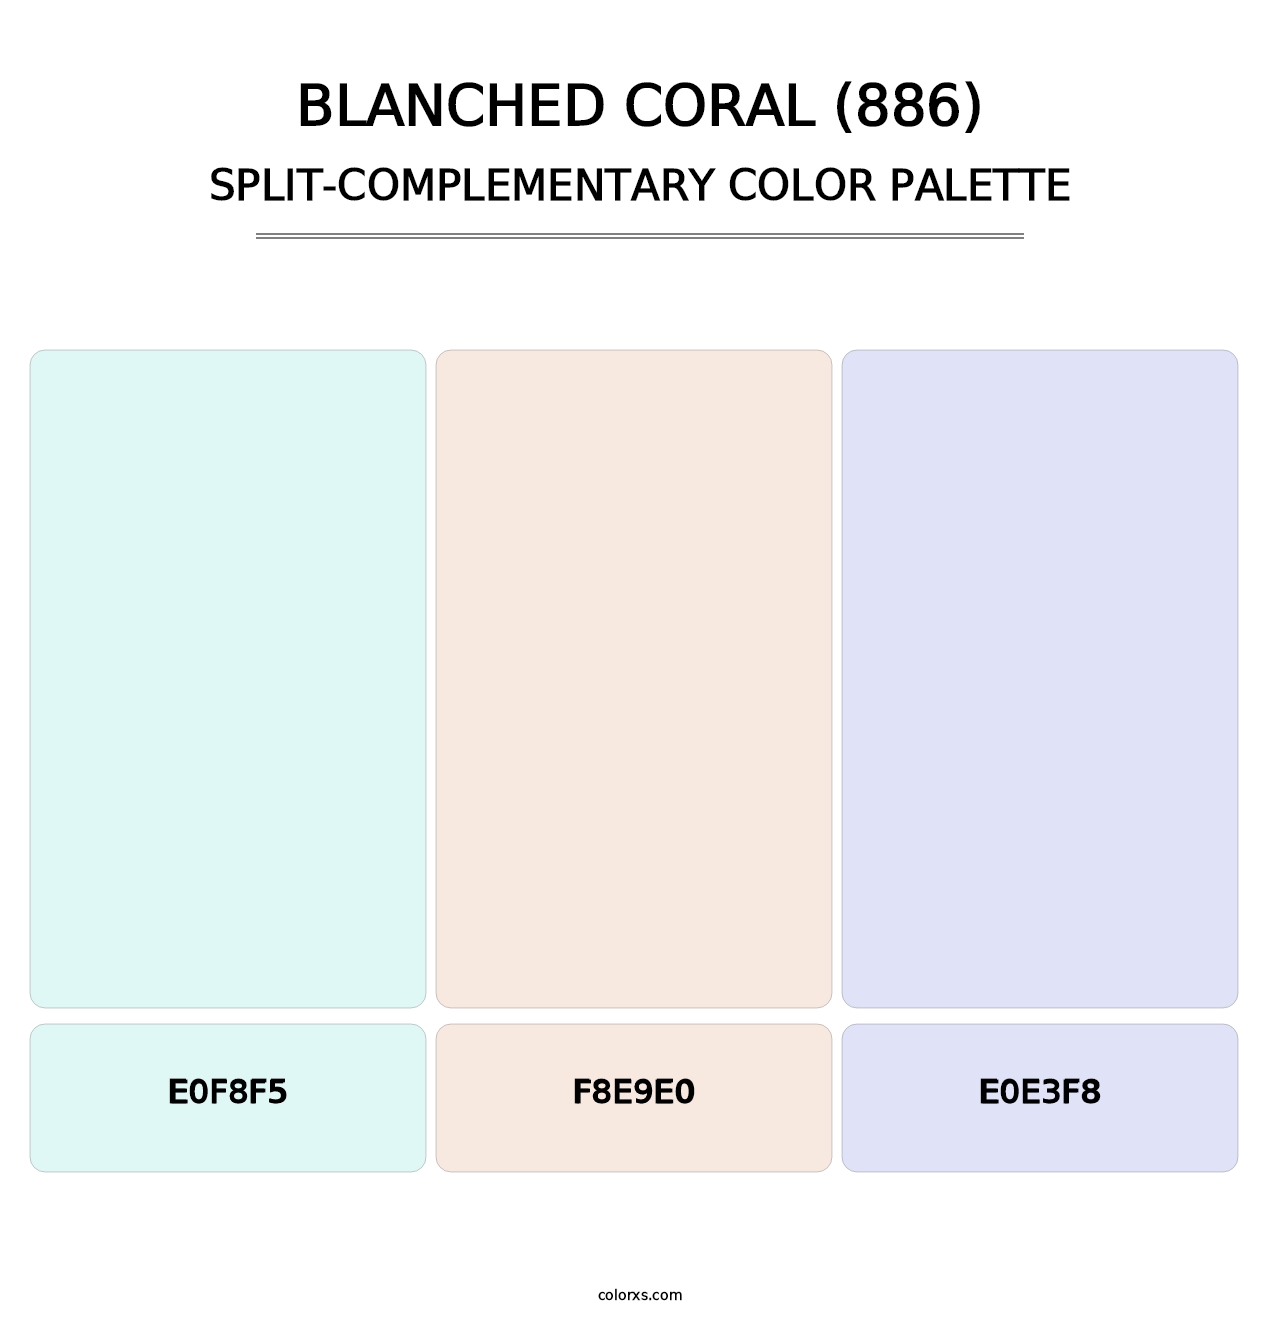 Blanched Coral (886) - Split-Complementary Color Palette